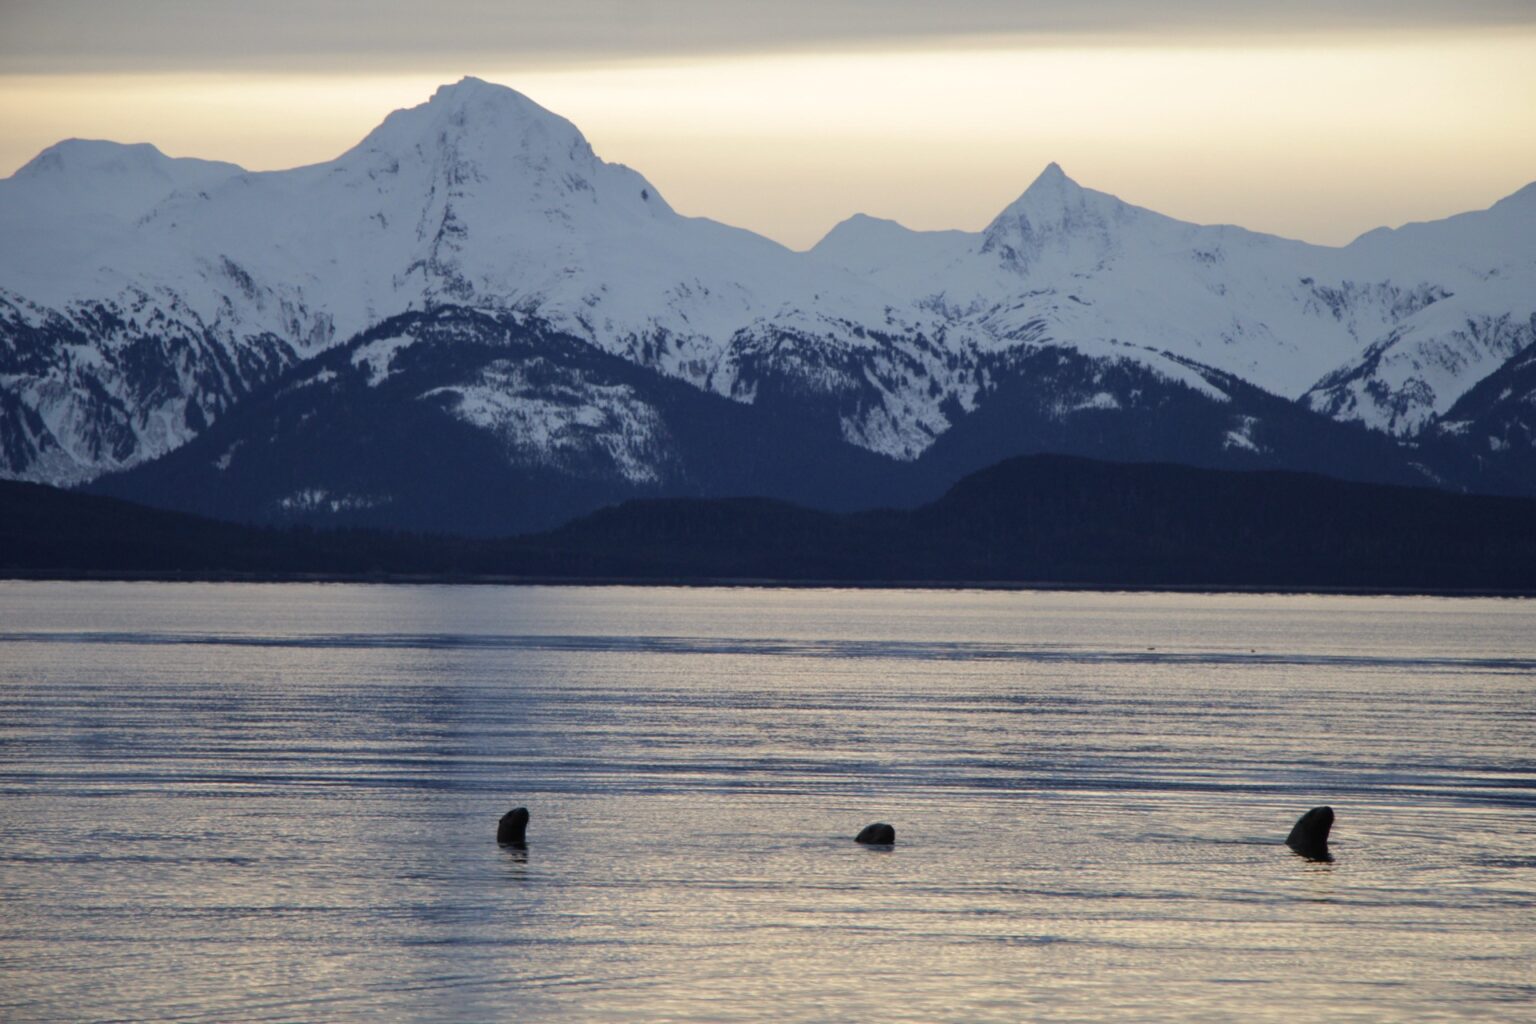 Three seals breaching the waters with the snowy mountains in the background.